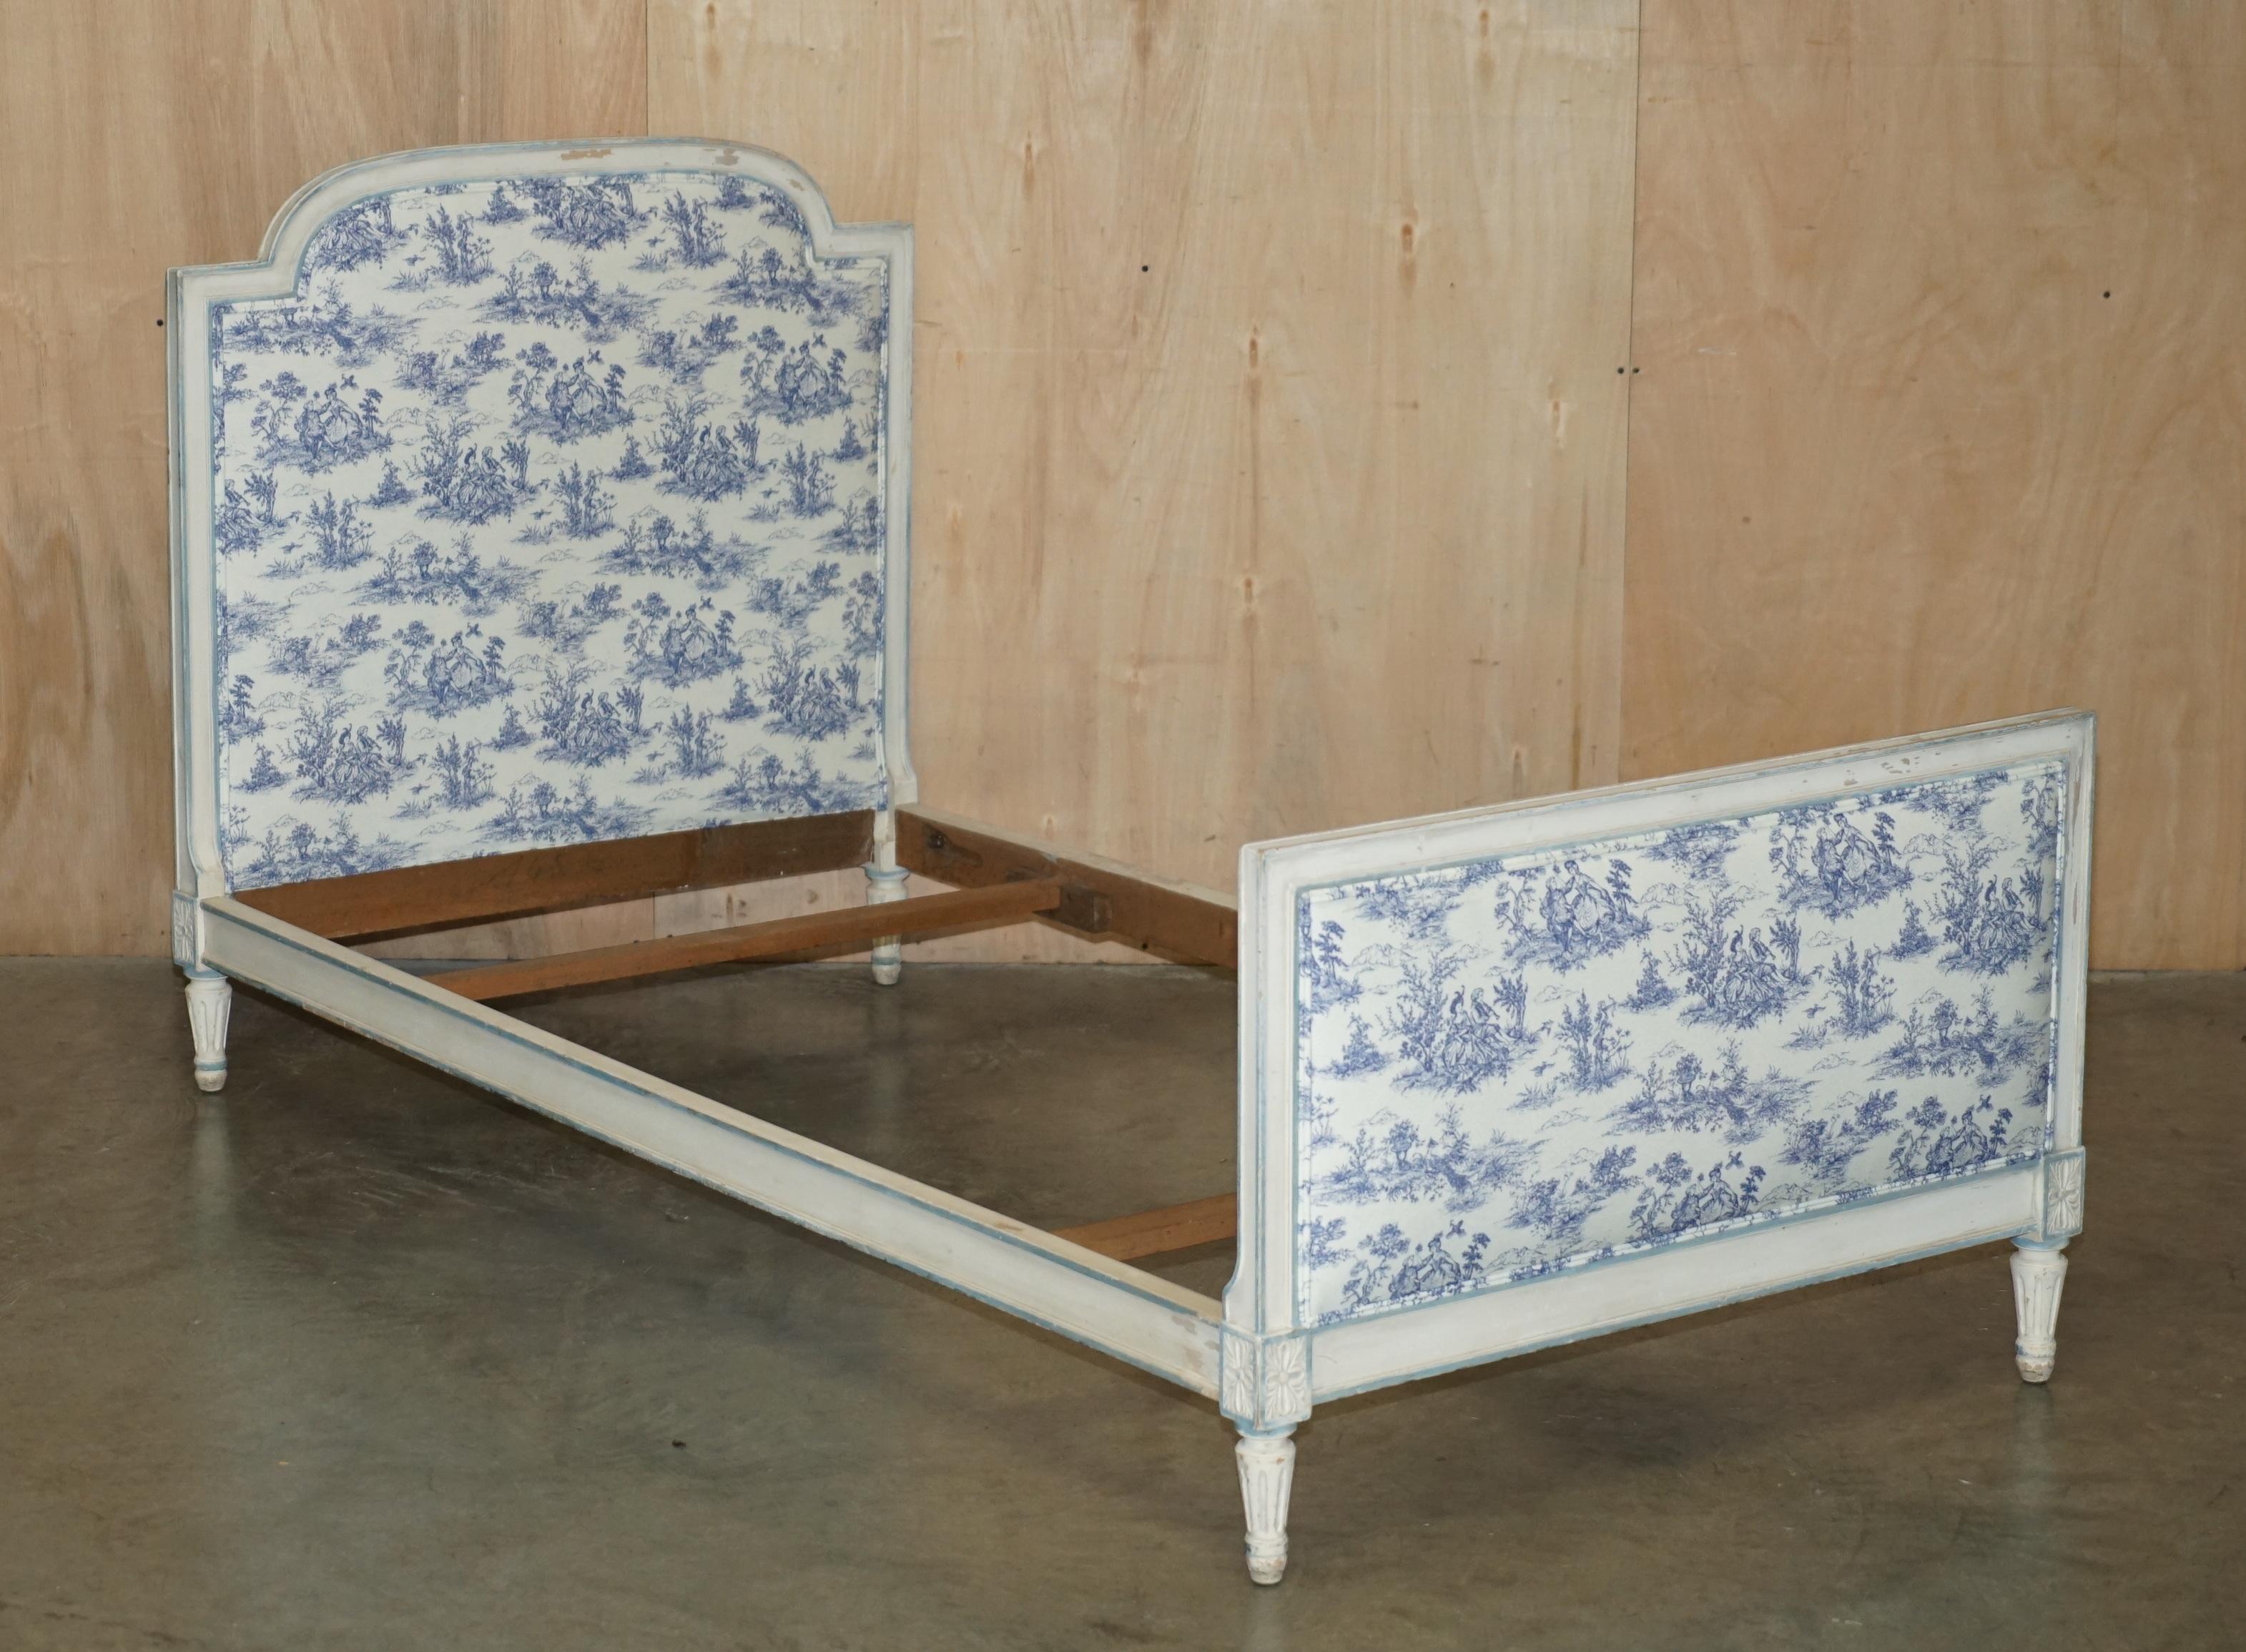 PAIR OF ANTIQUE FRENCH SiNGLE BEDSTEAD FRAMES WITH TOILE DE JOUY UPHOLSTERY For Sale 7